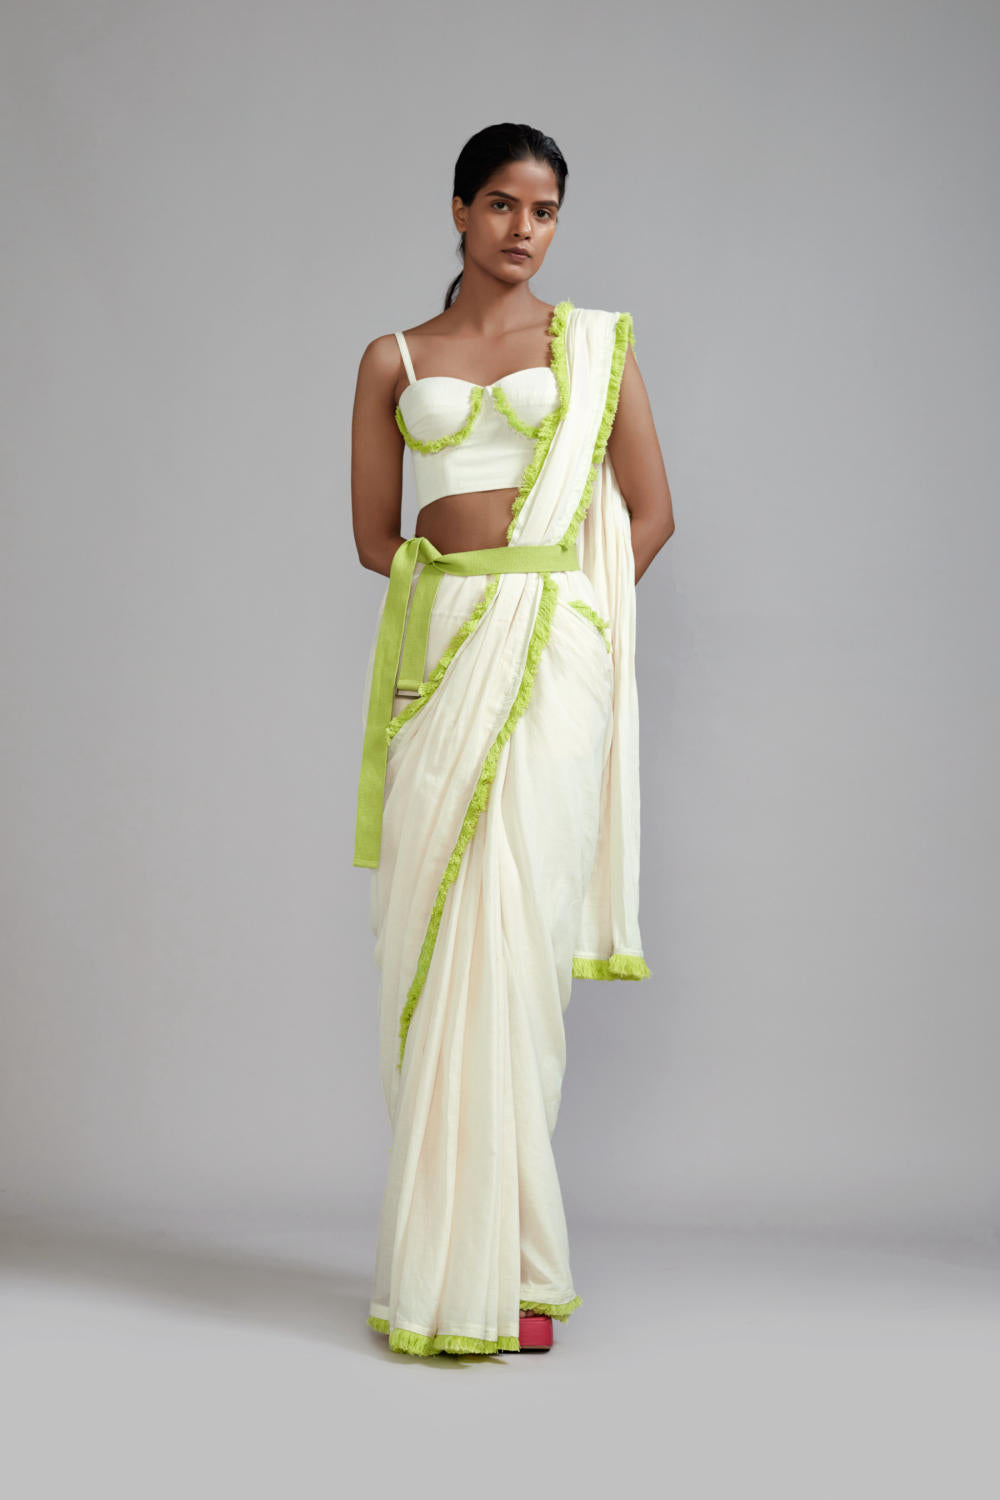 Off-White With Neon Green Saree & Fringed Corset Set (2 PCS)